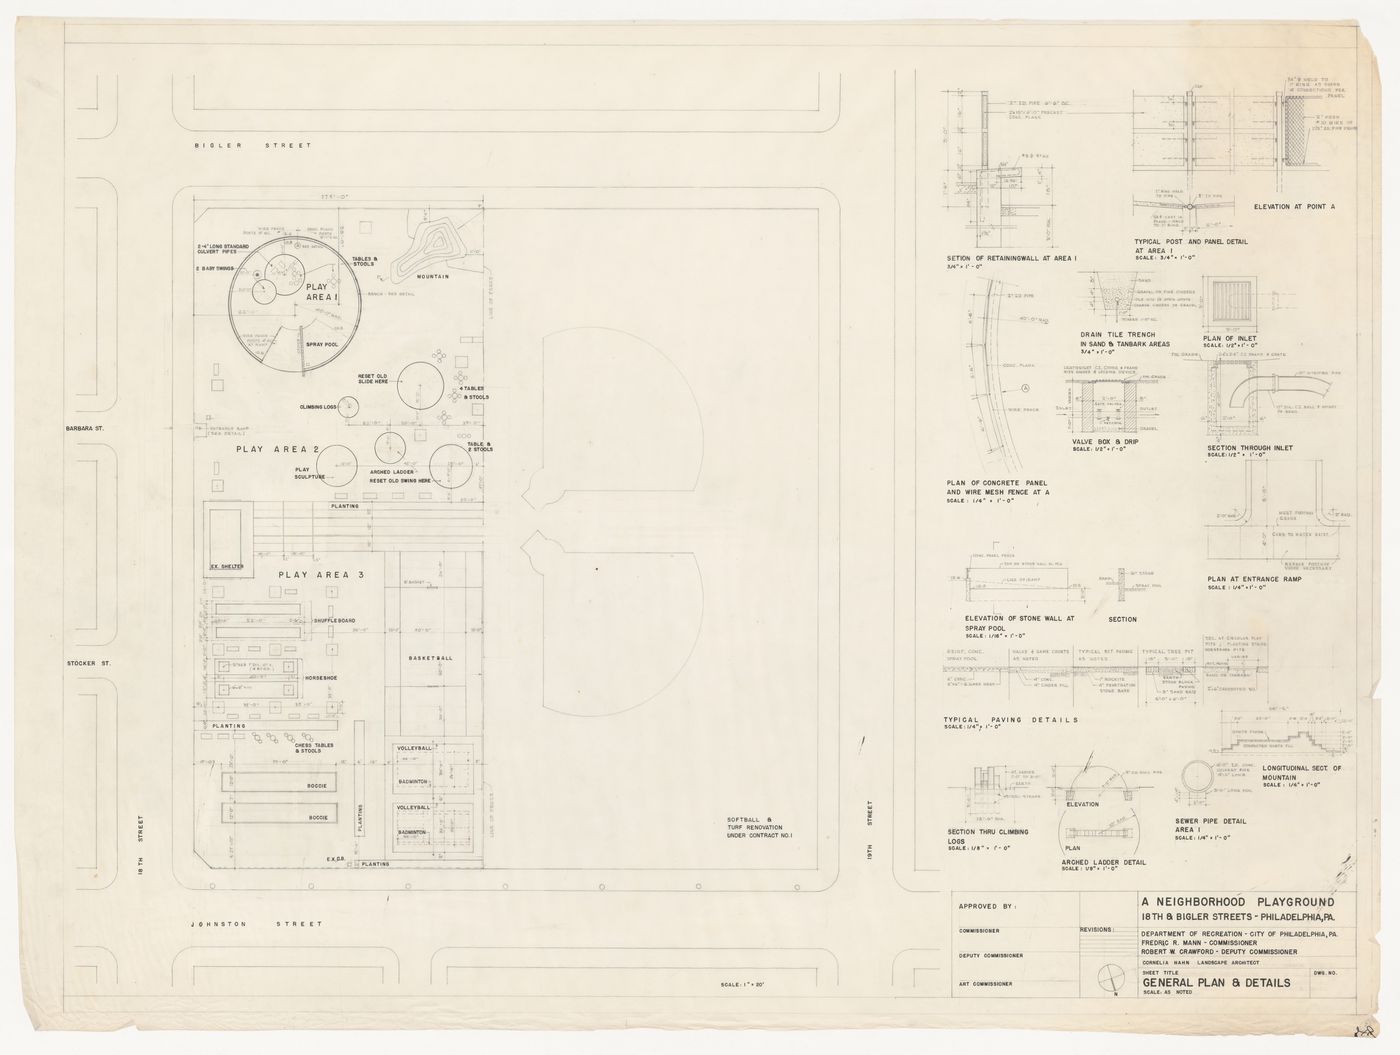 Site plan with details for recreational area at 18th and Bigler Streets, Philadelphia, Pennsylvania